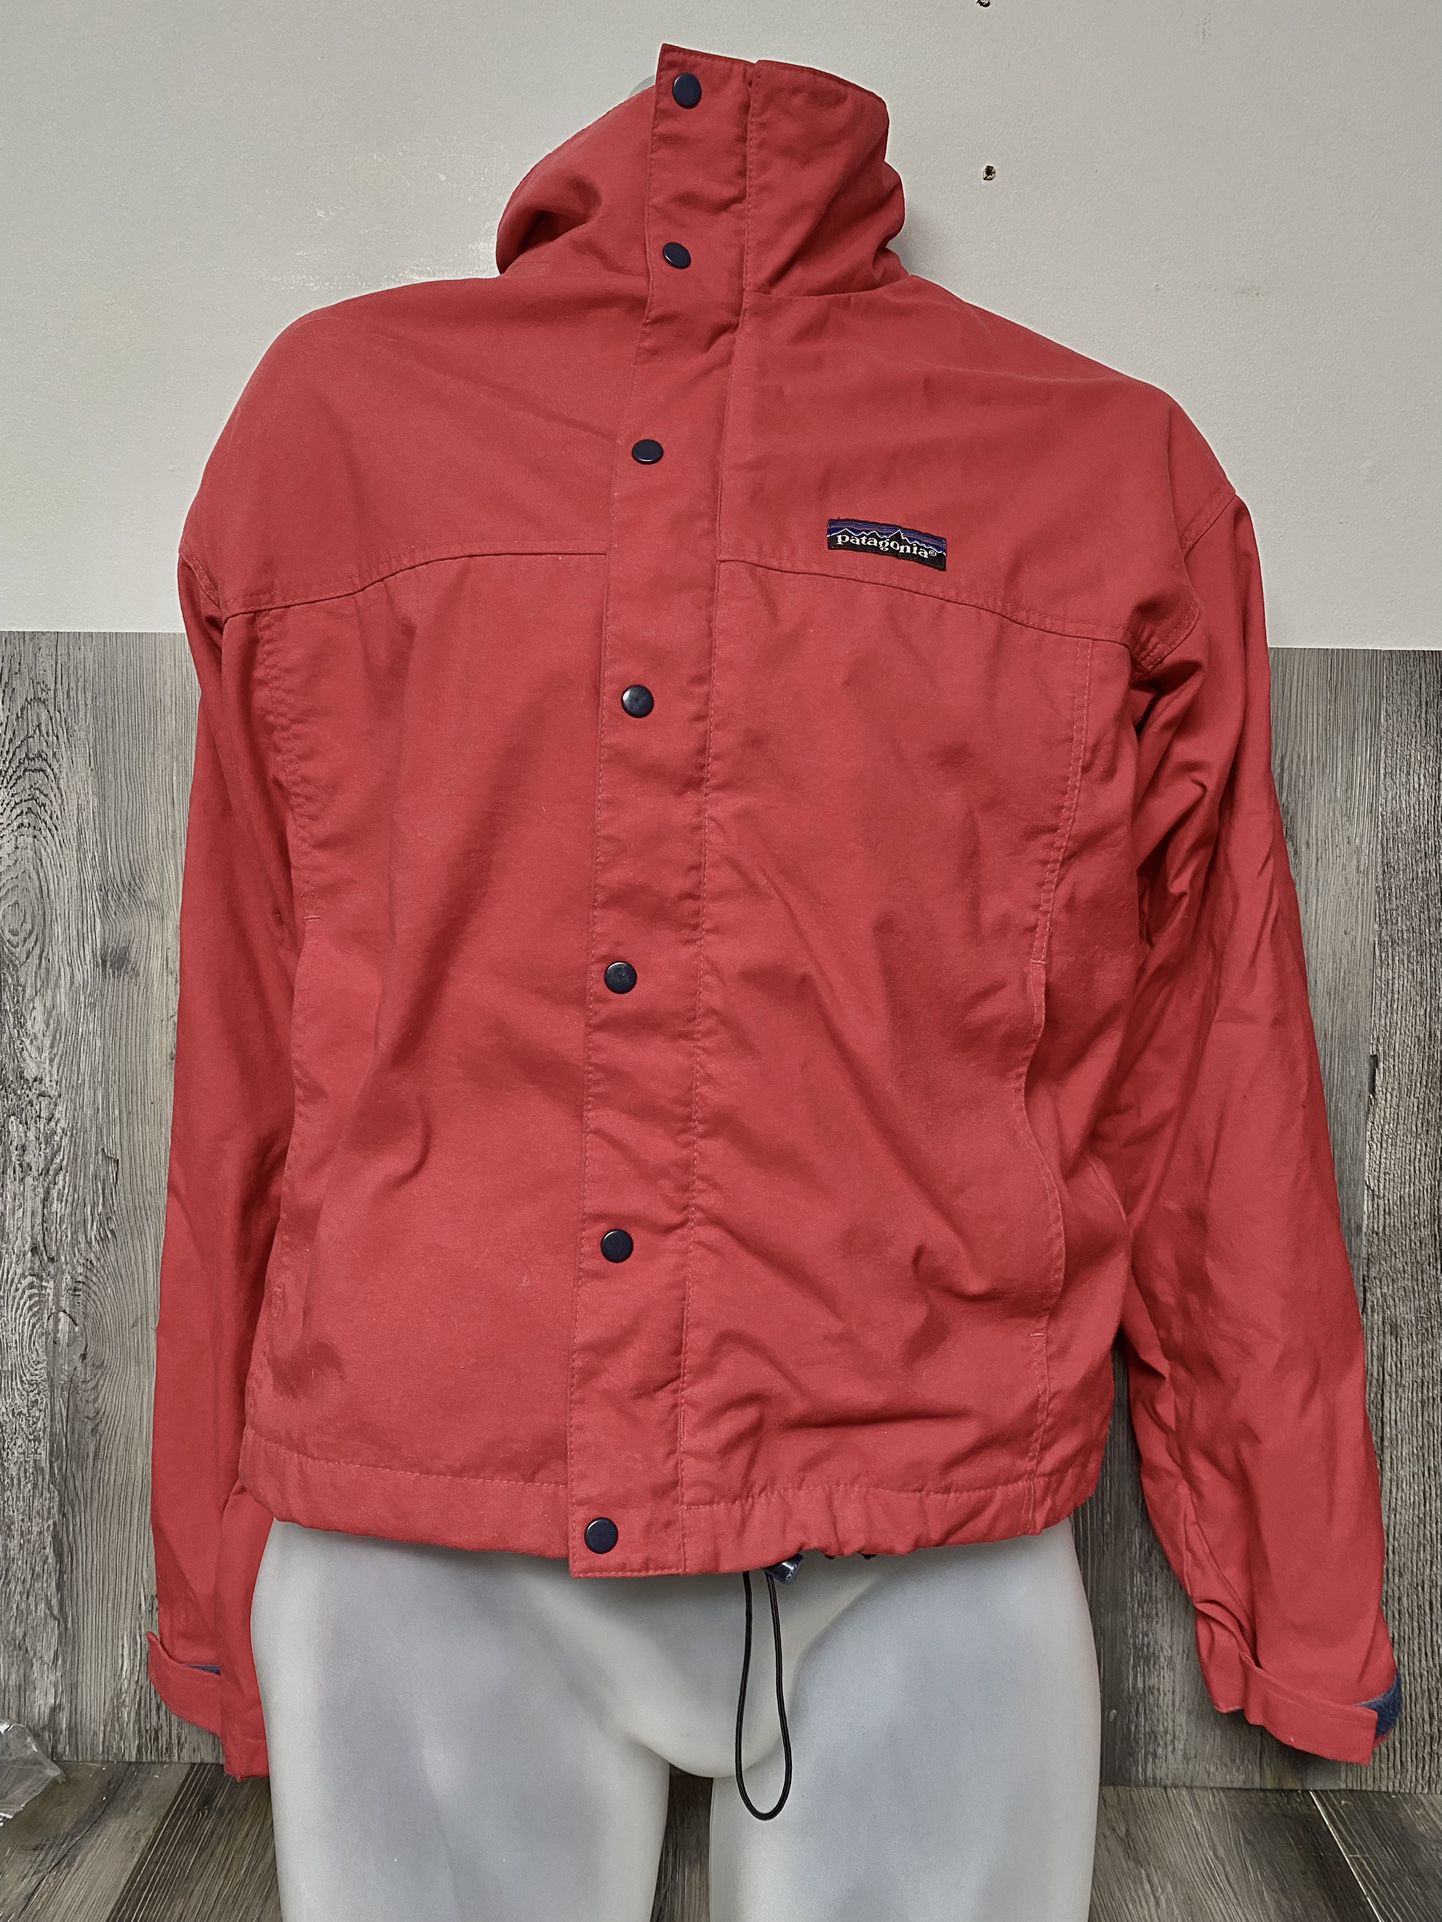 Vintage Patagonia Snap Zip Jacket Size Extra Small XS 90s Red